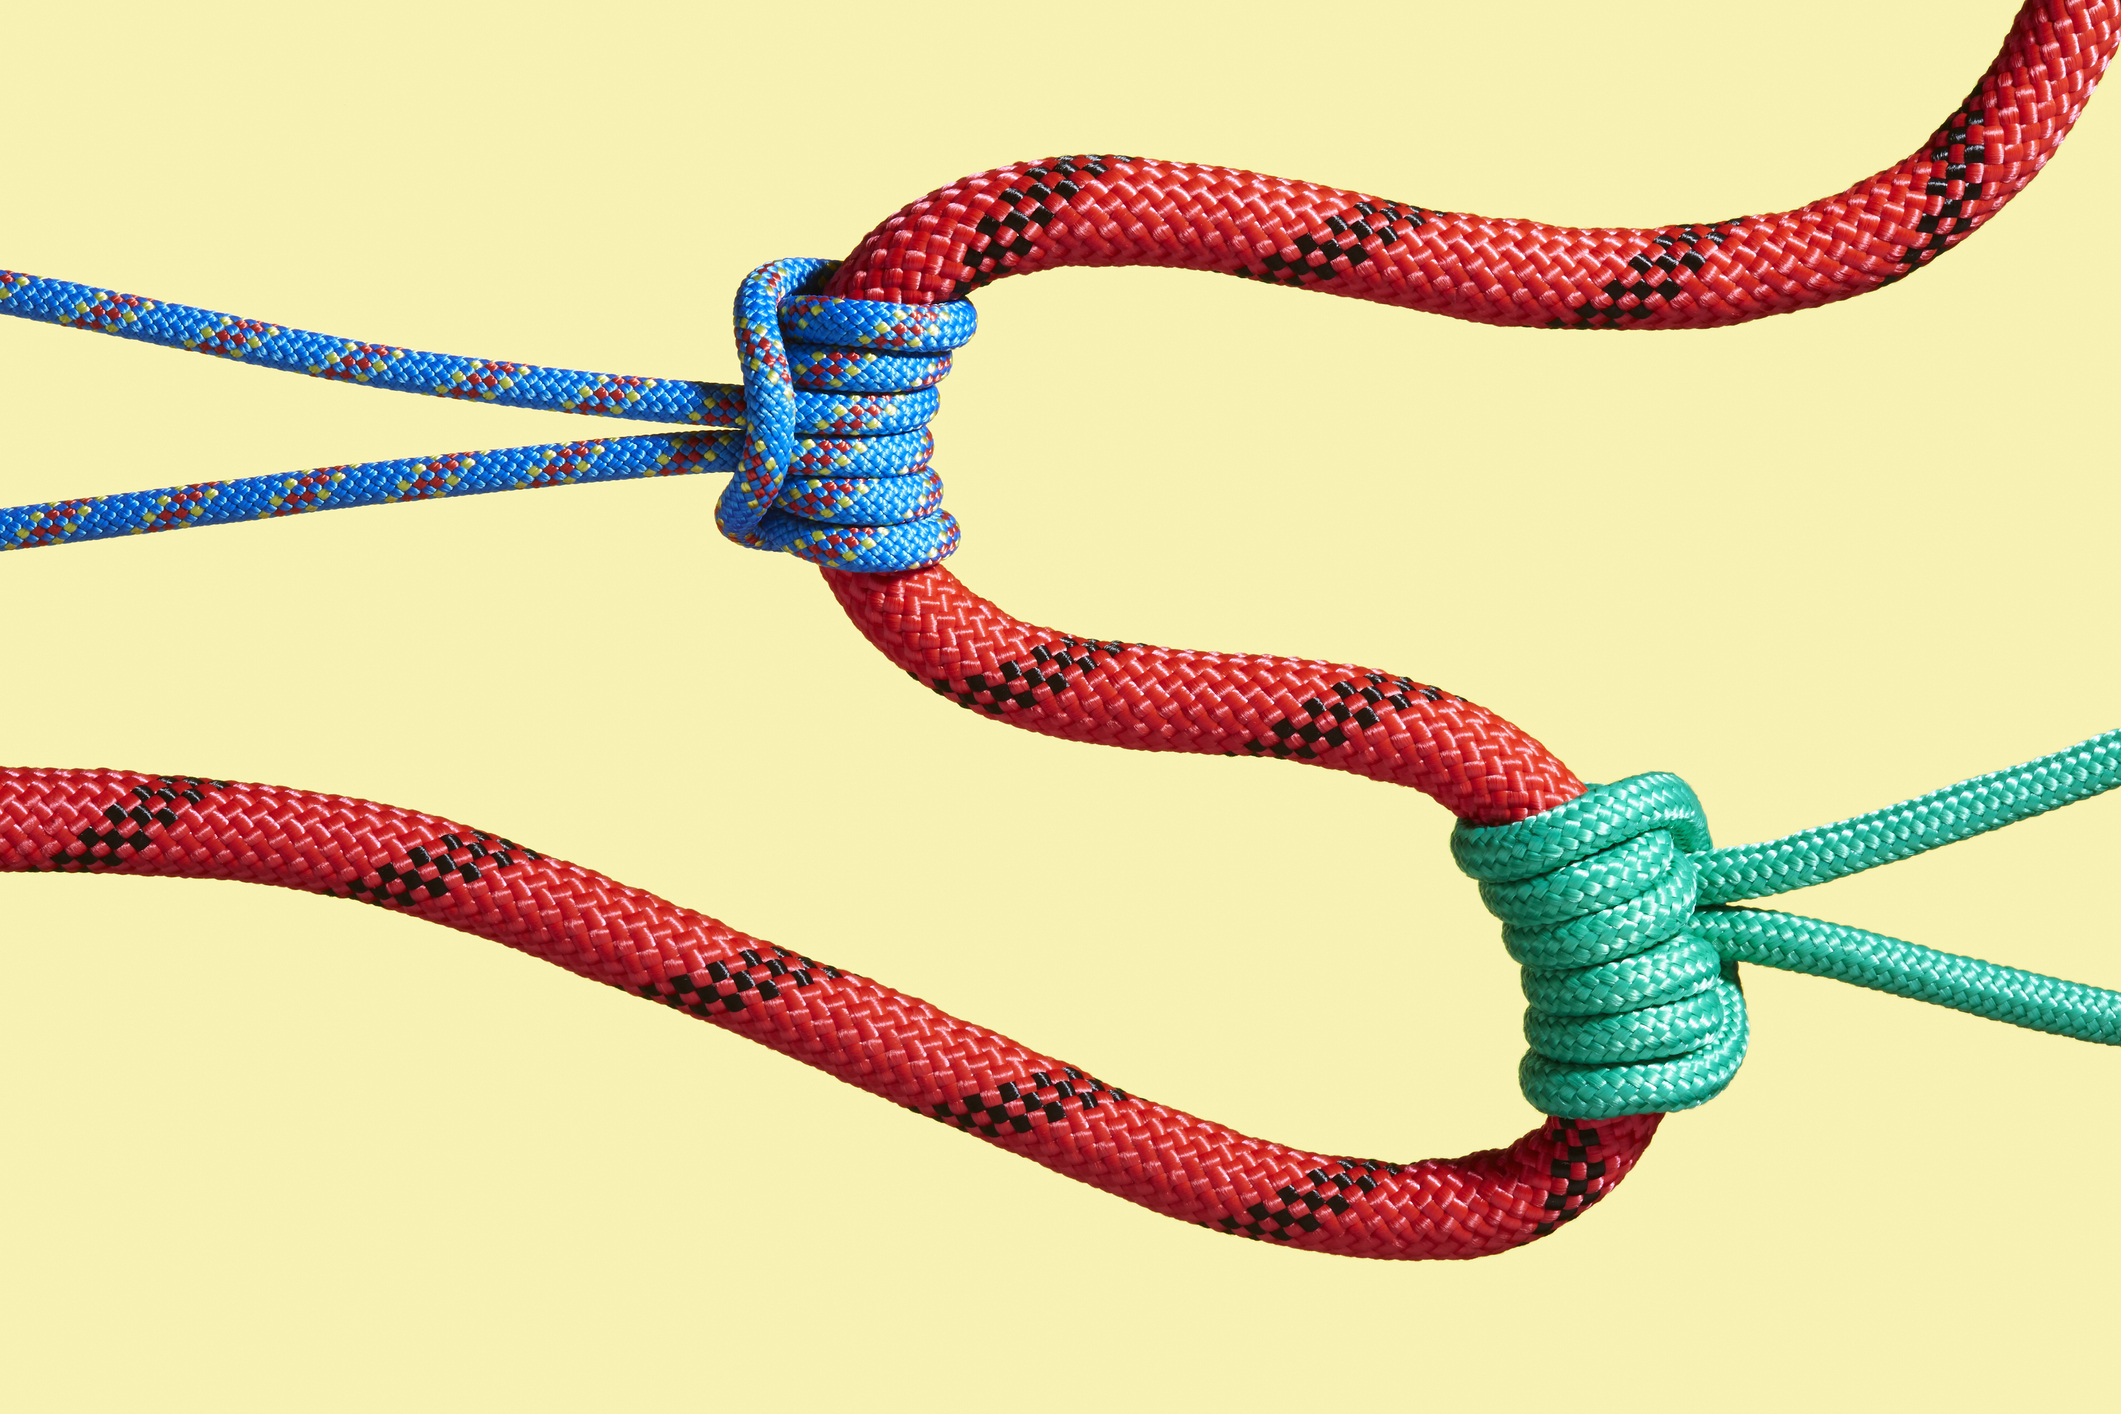 Two ropes pulling on a larger rope to shape its path